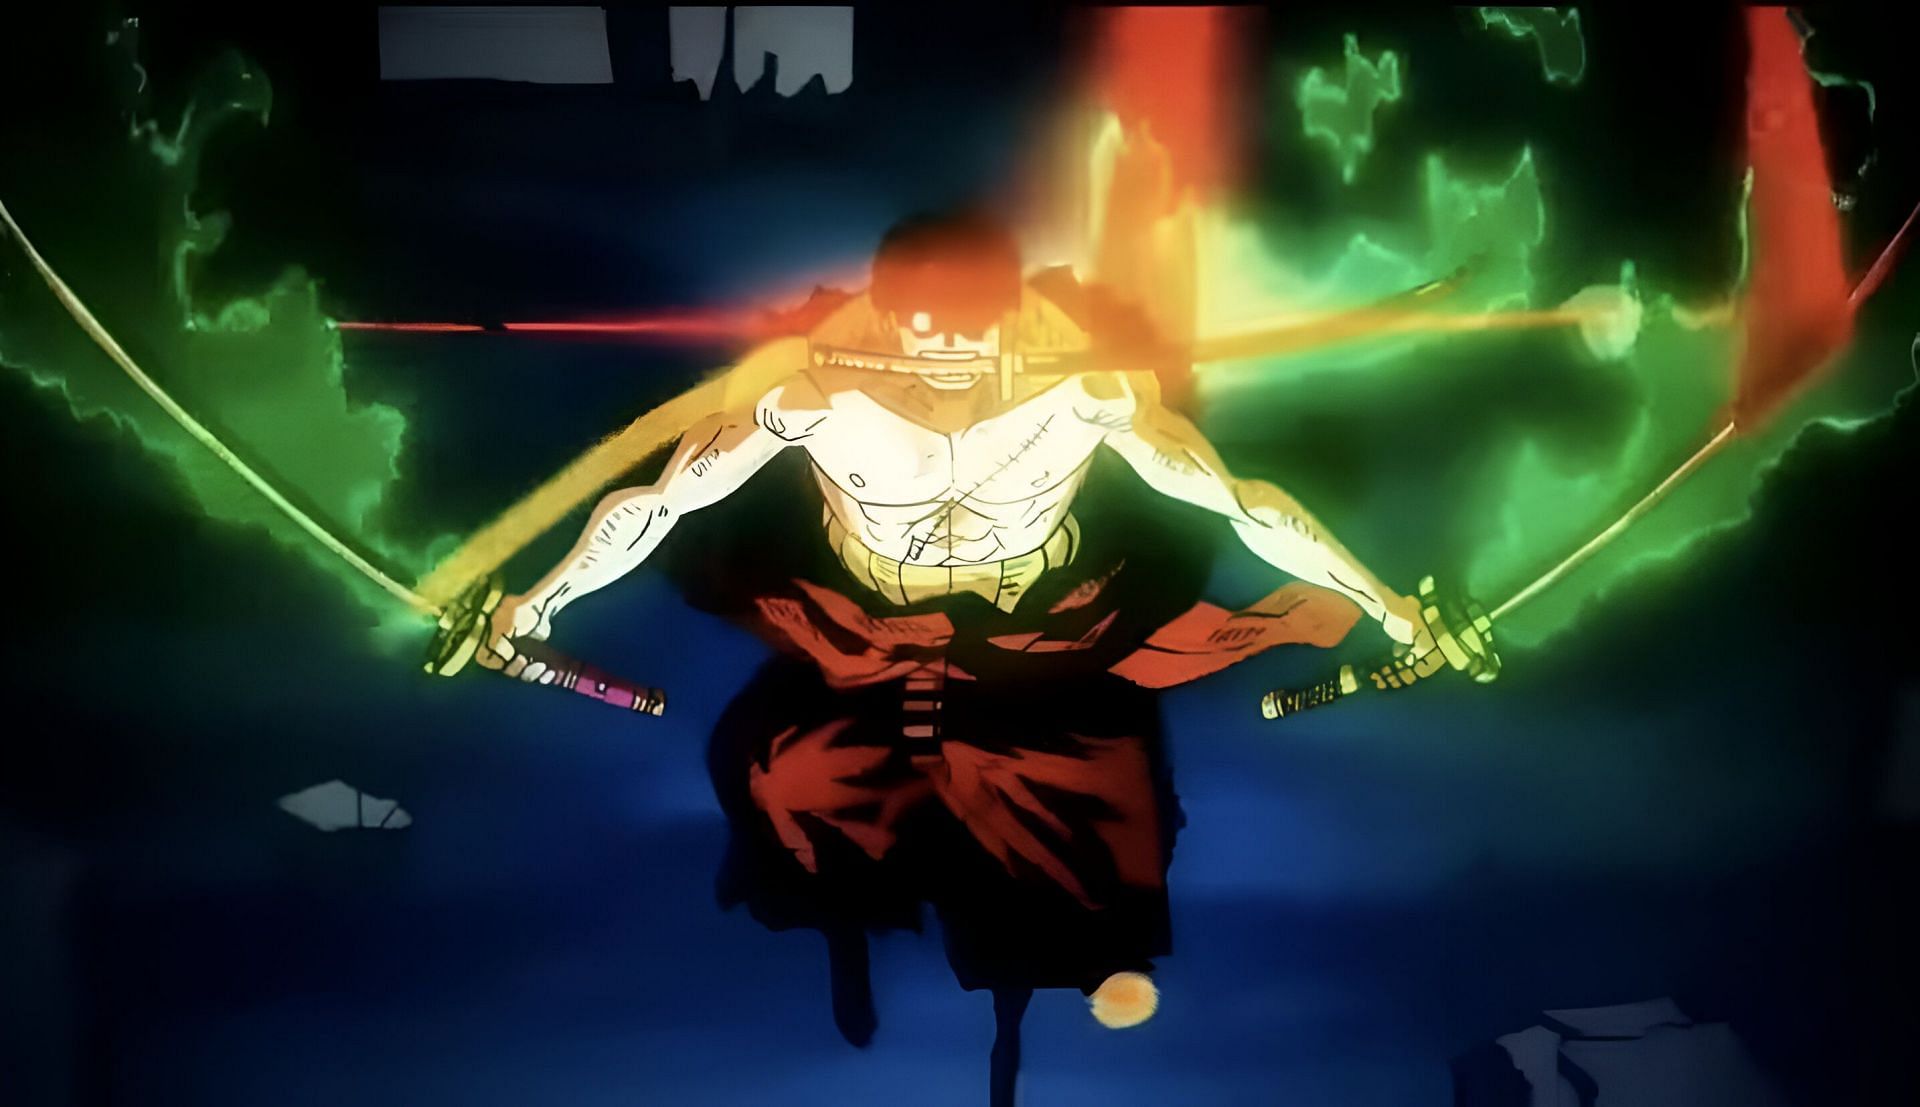 Zoro as seen in the anime (Image via Toei Animation)